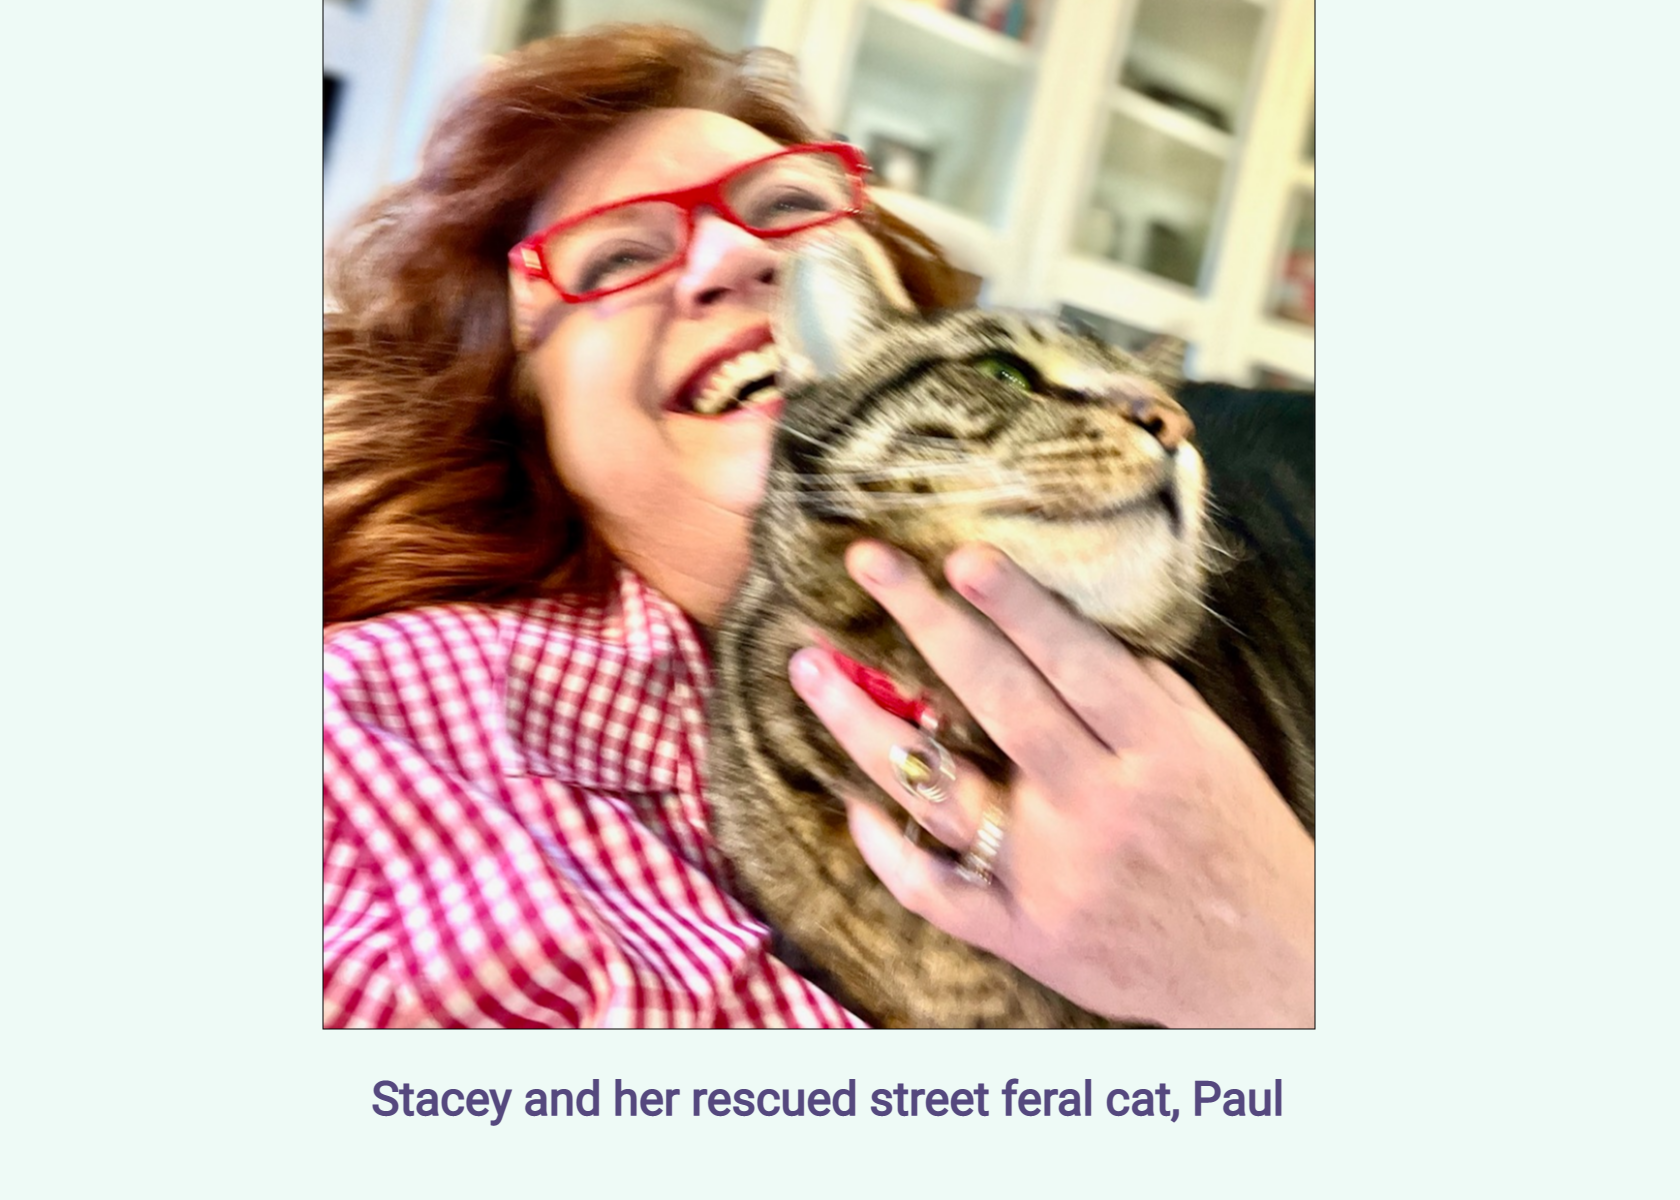 Stacey and her rescued street feral cat, Paul.